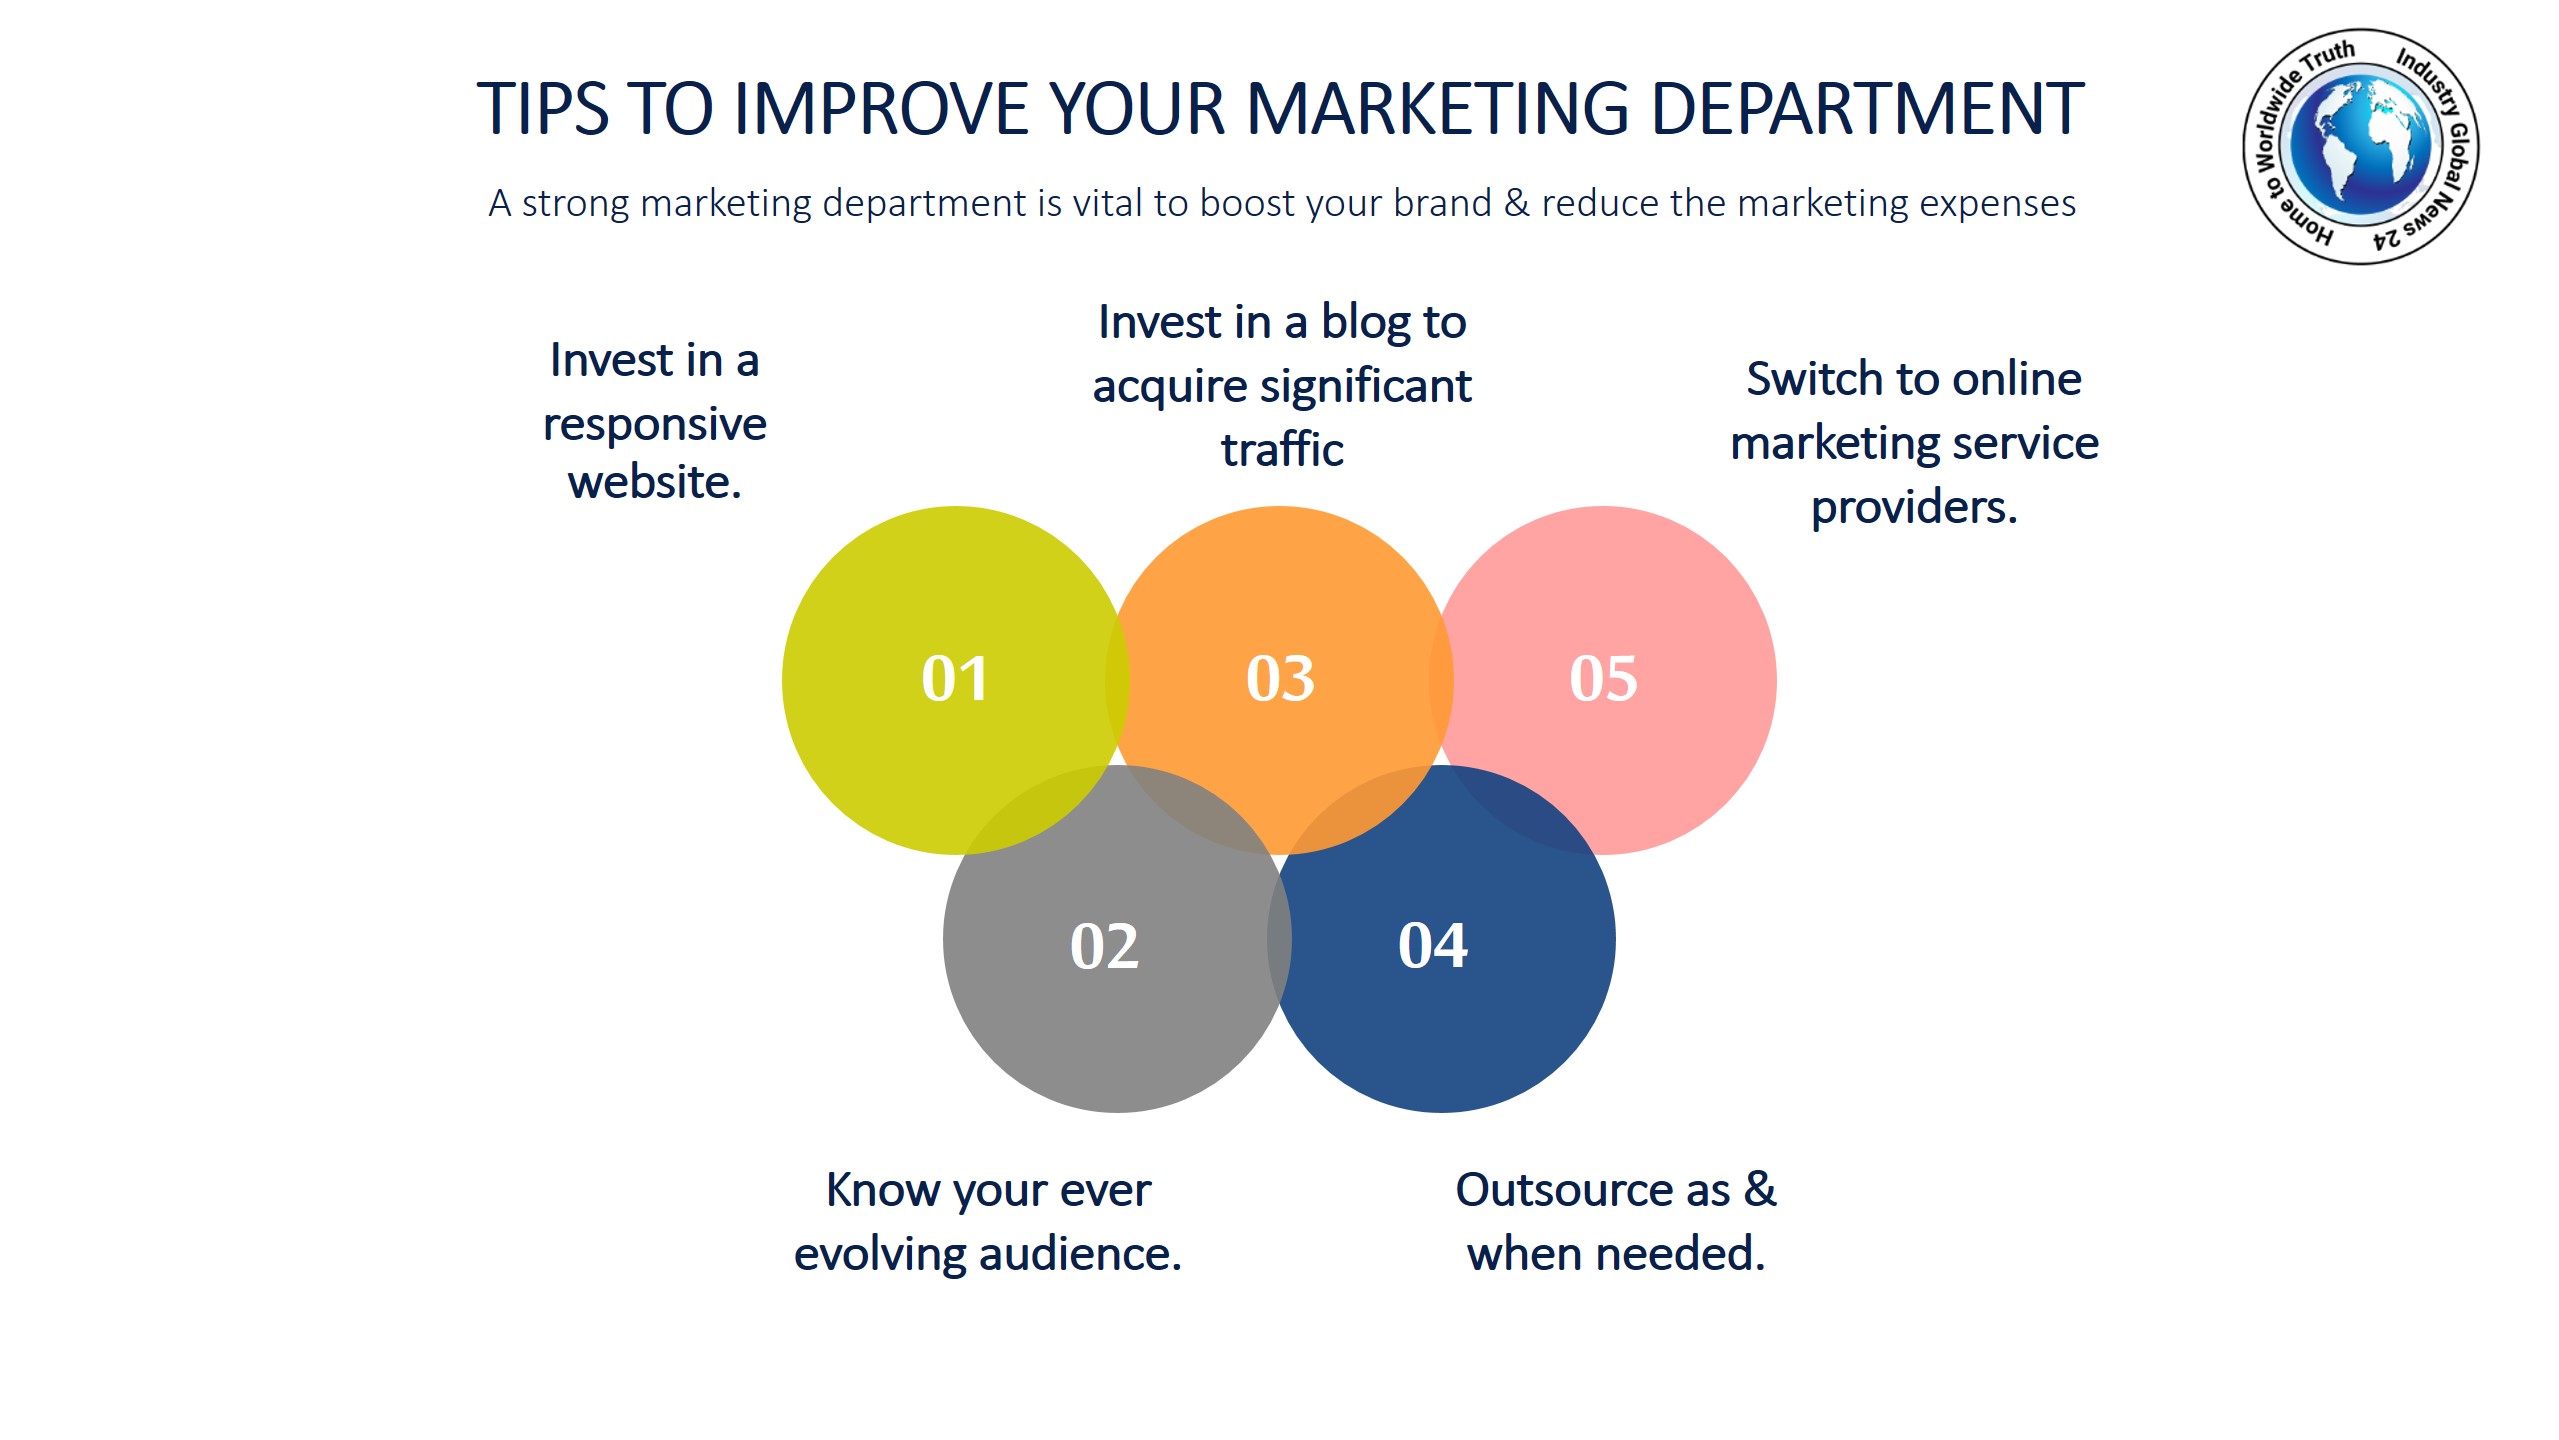 Tips to improve your marketing department